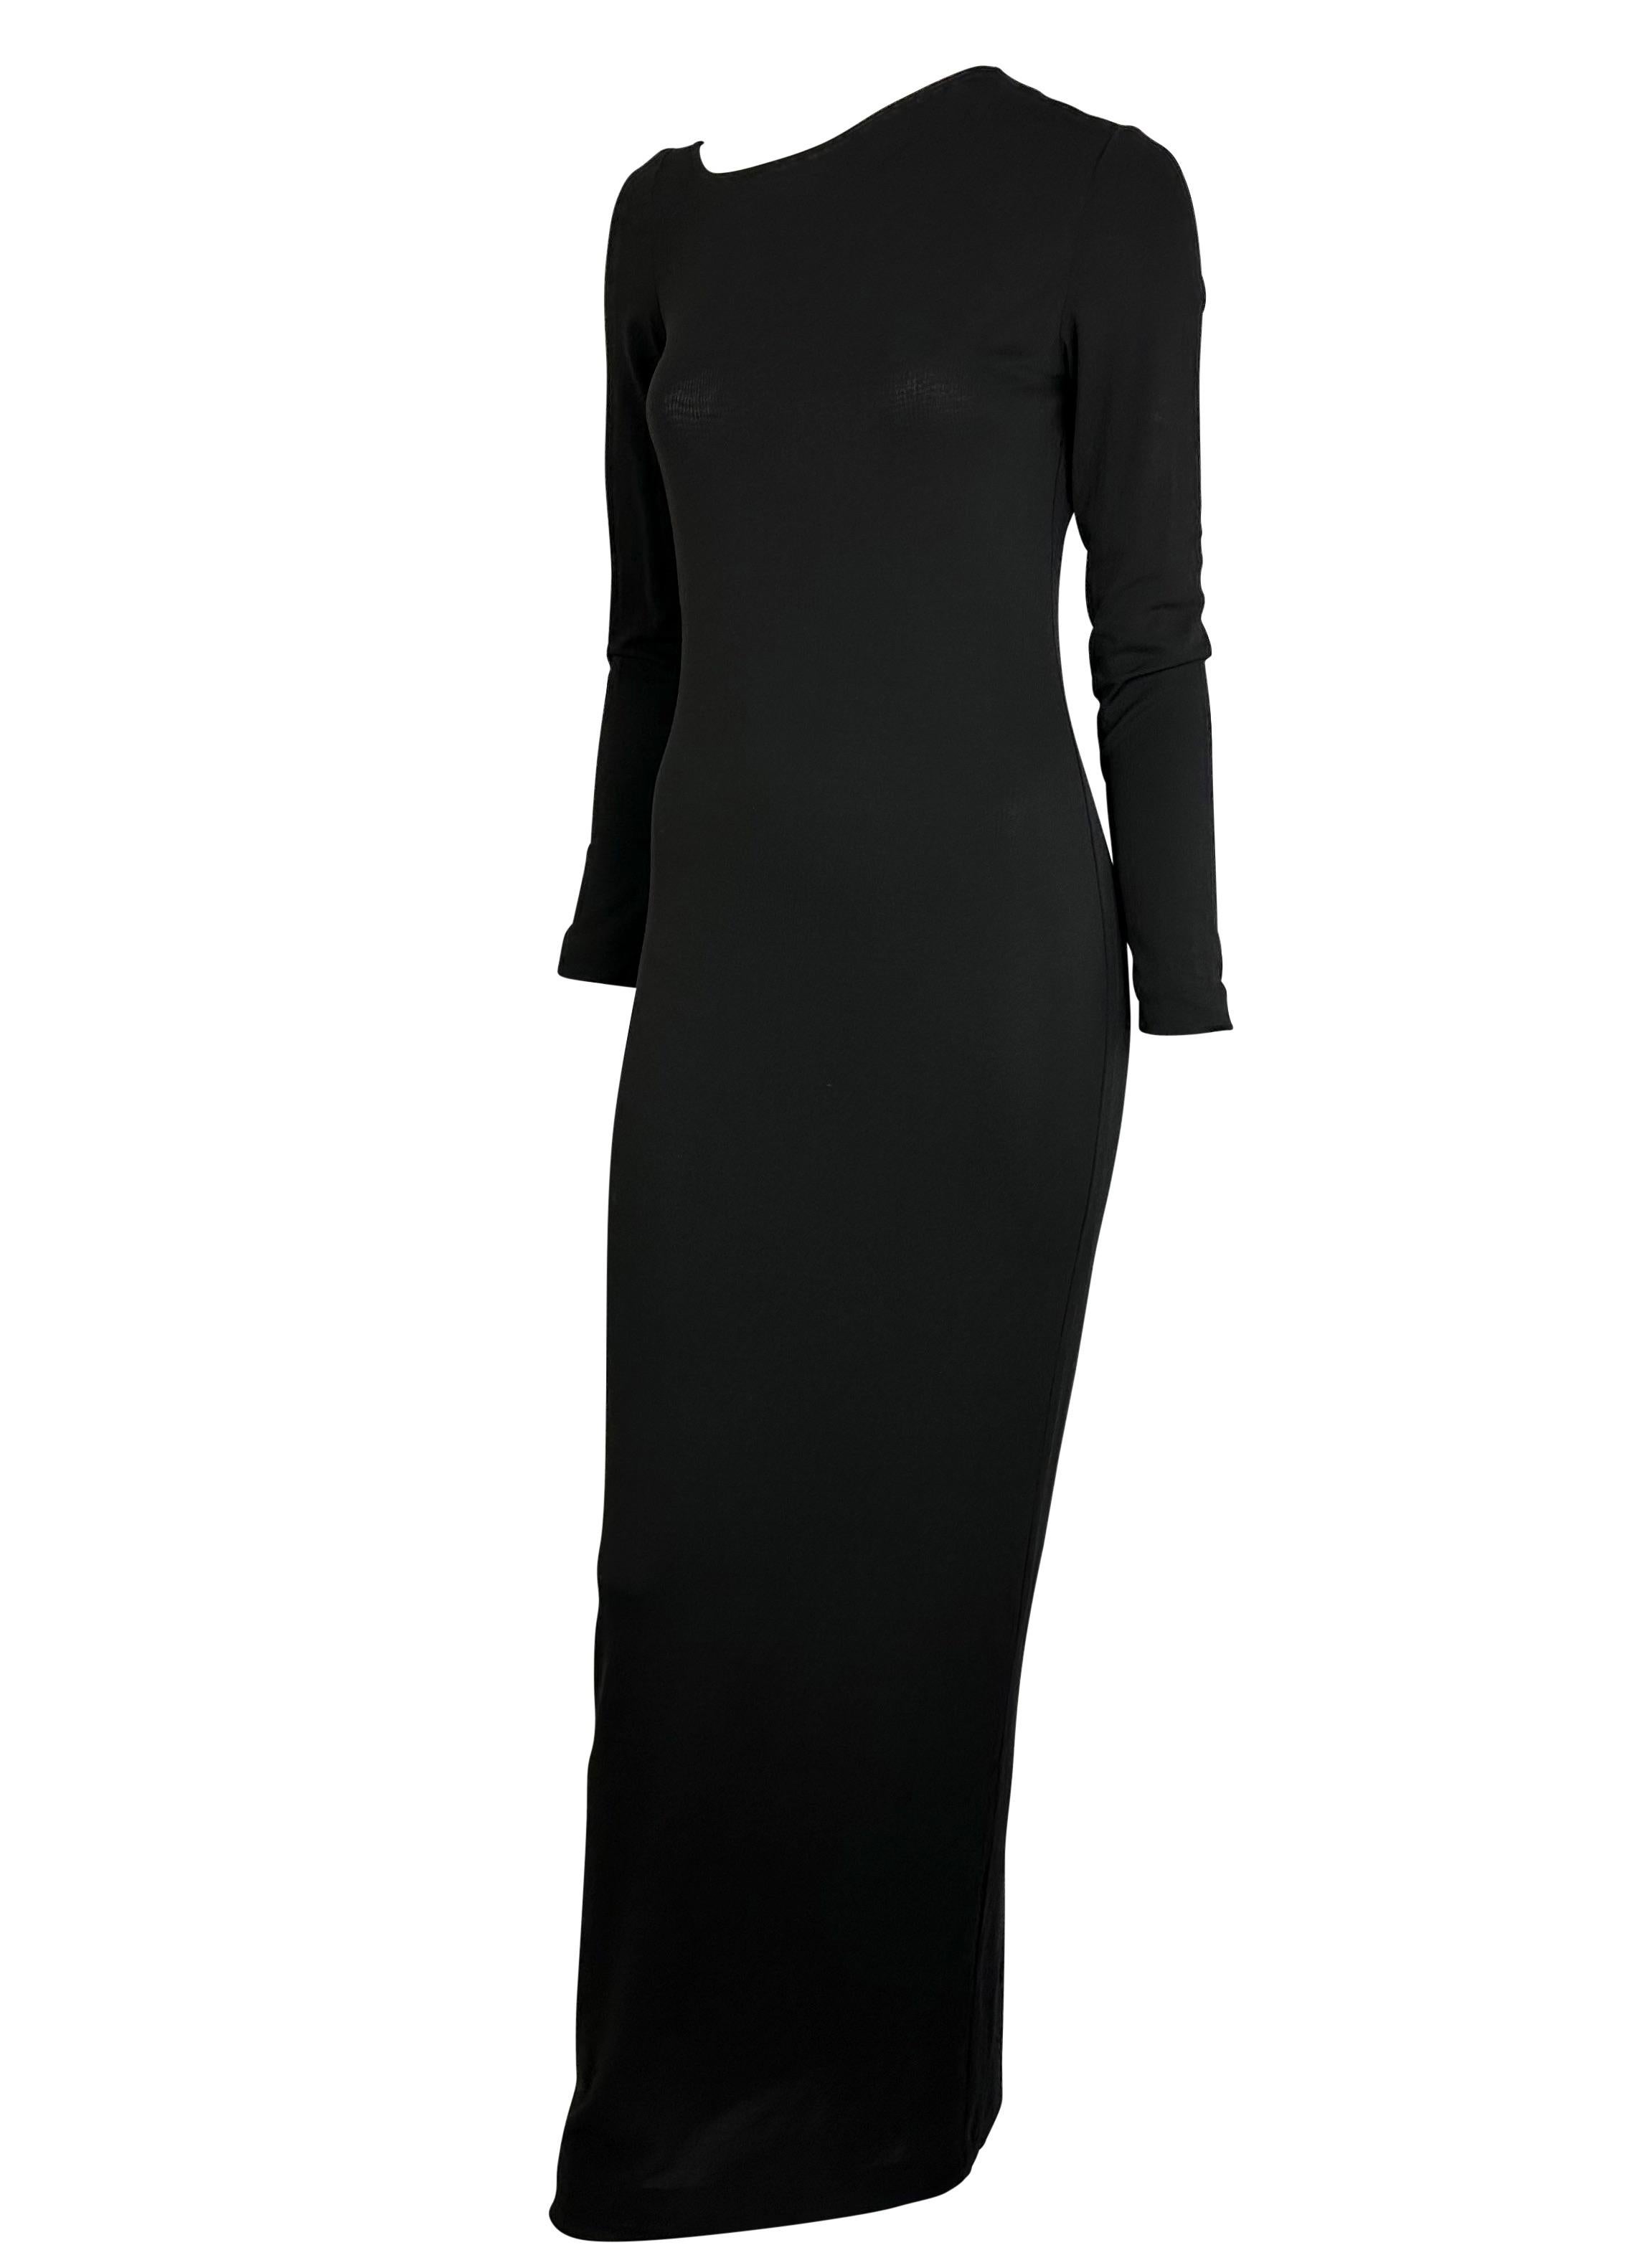 Presenting an incredible black viscose Gucci gown, designed by Tom Ford. From the Spring/Summer 1998 collection, this long sleeve dress perfectly drapes on the wearer's body with a semi-sheer viscose jersey that provides a water-like effect. This